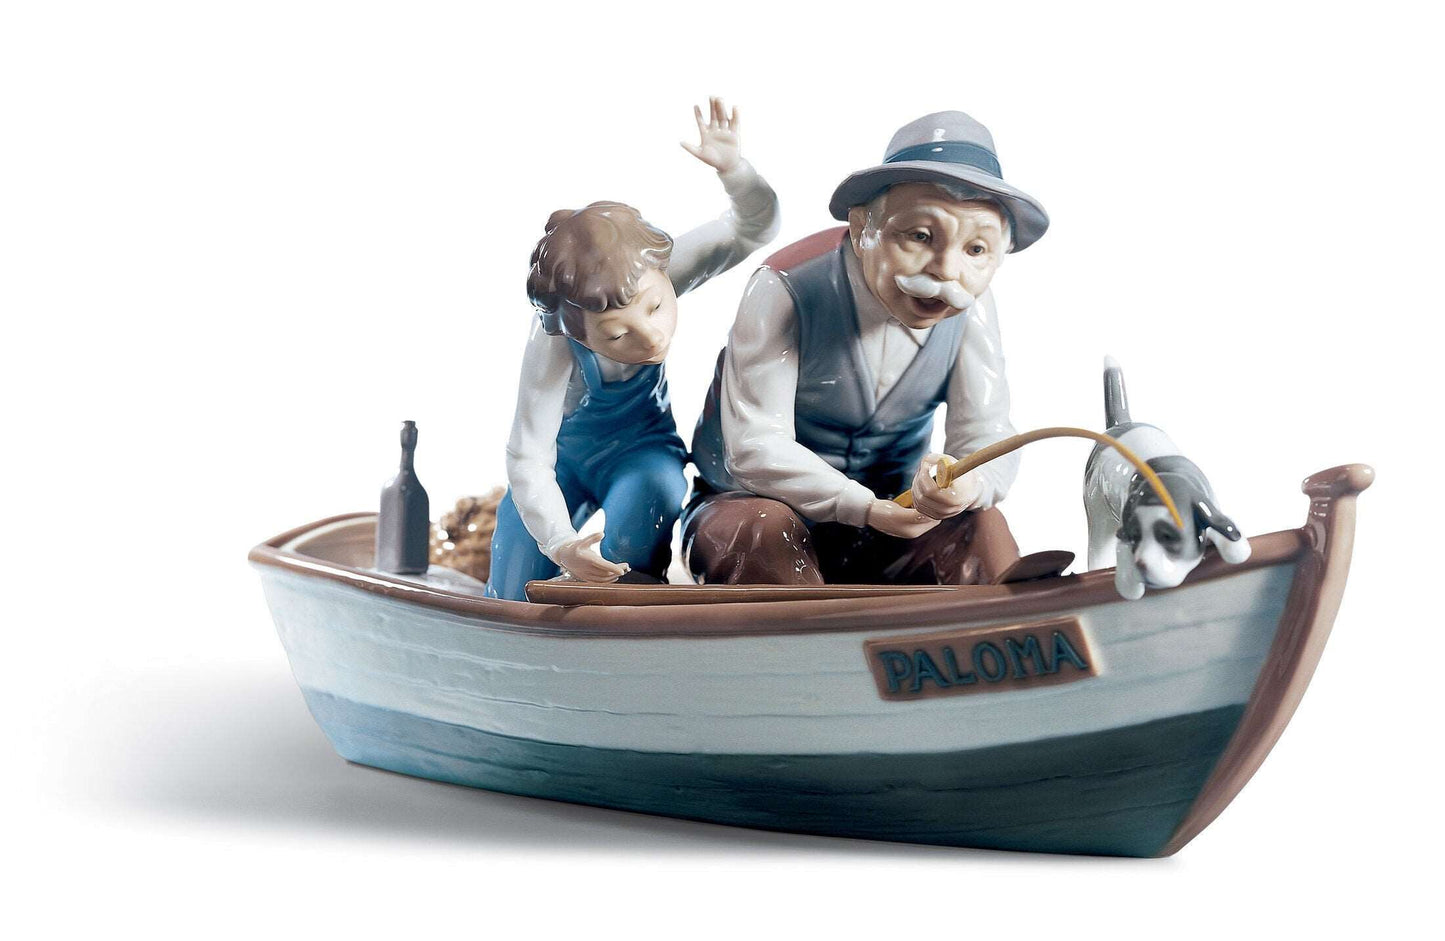 Fishing with Gramps Figurine